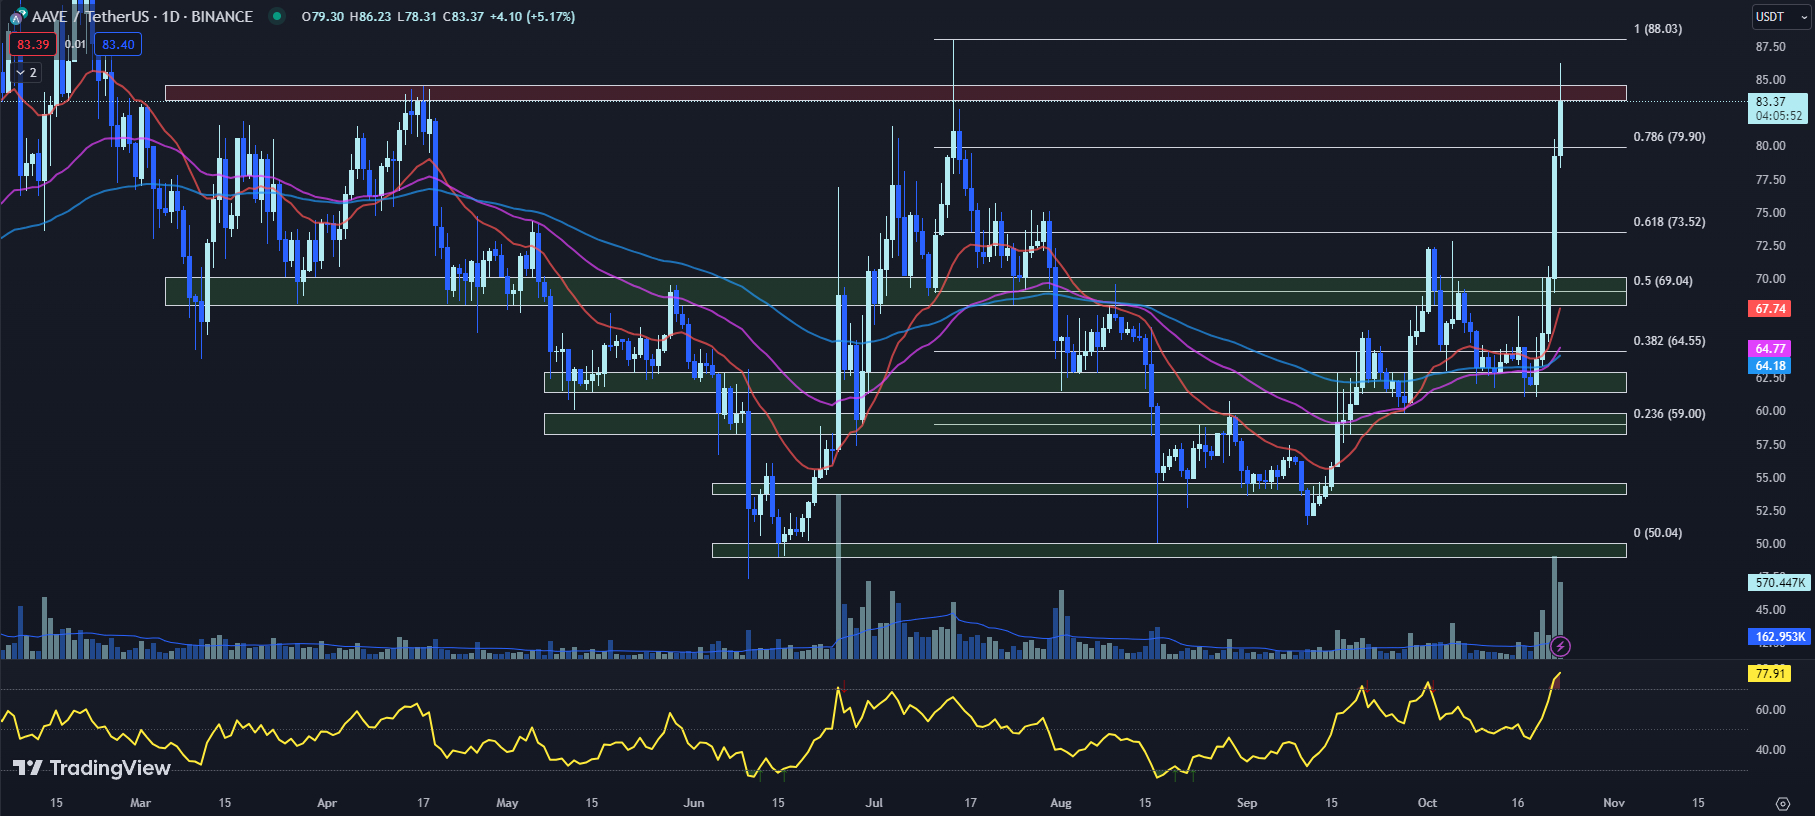 TradingView chart for the AAVE price 10-23-23